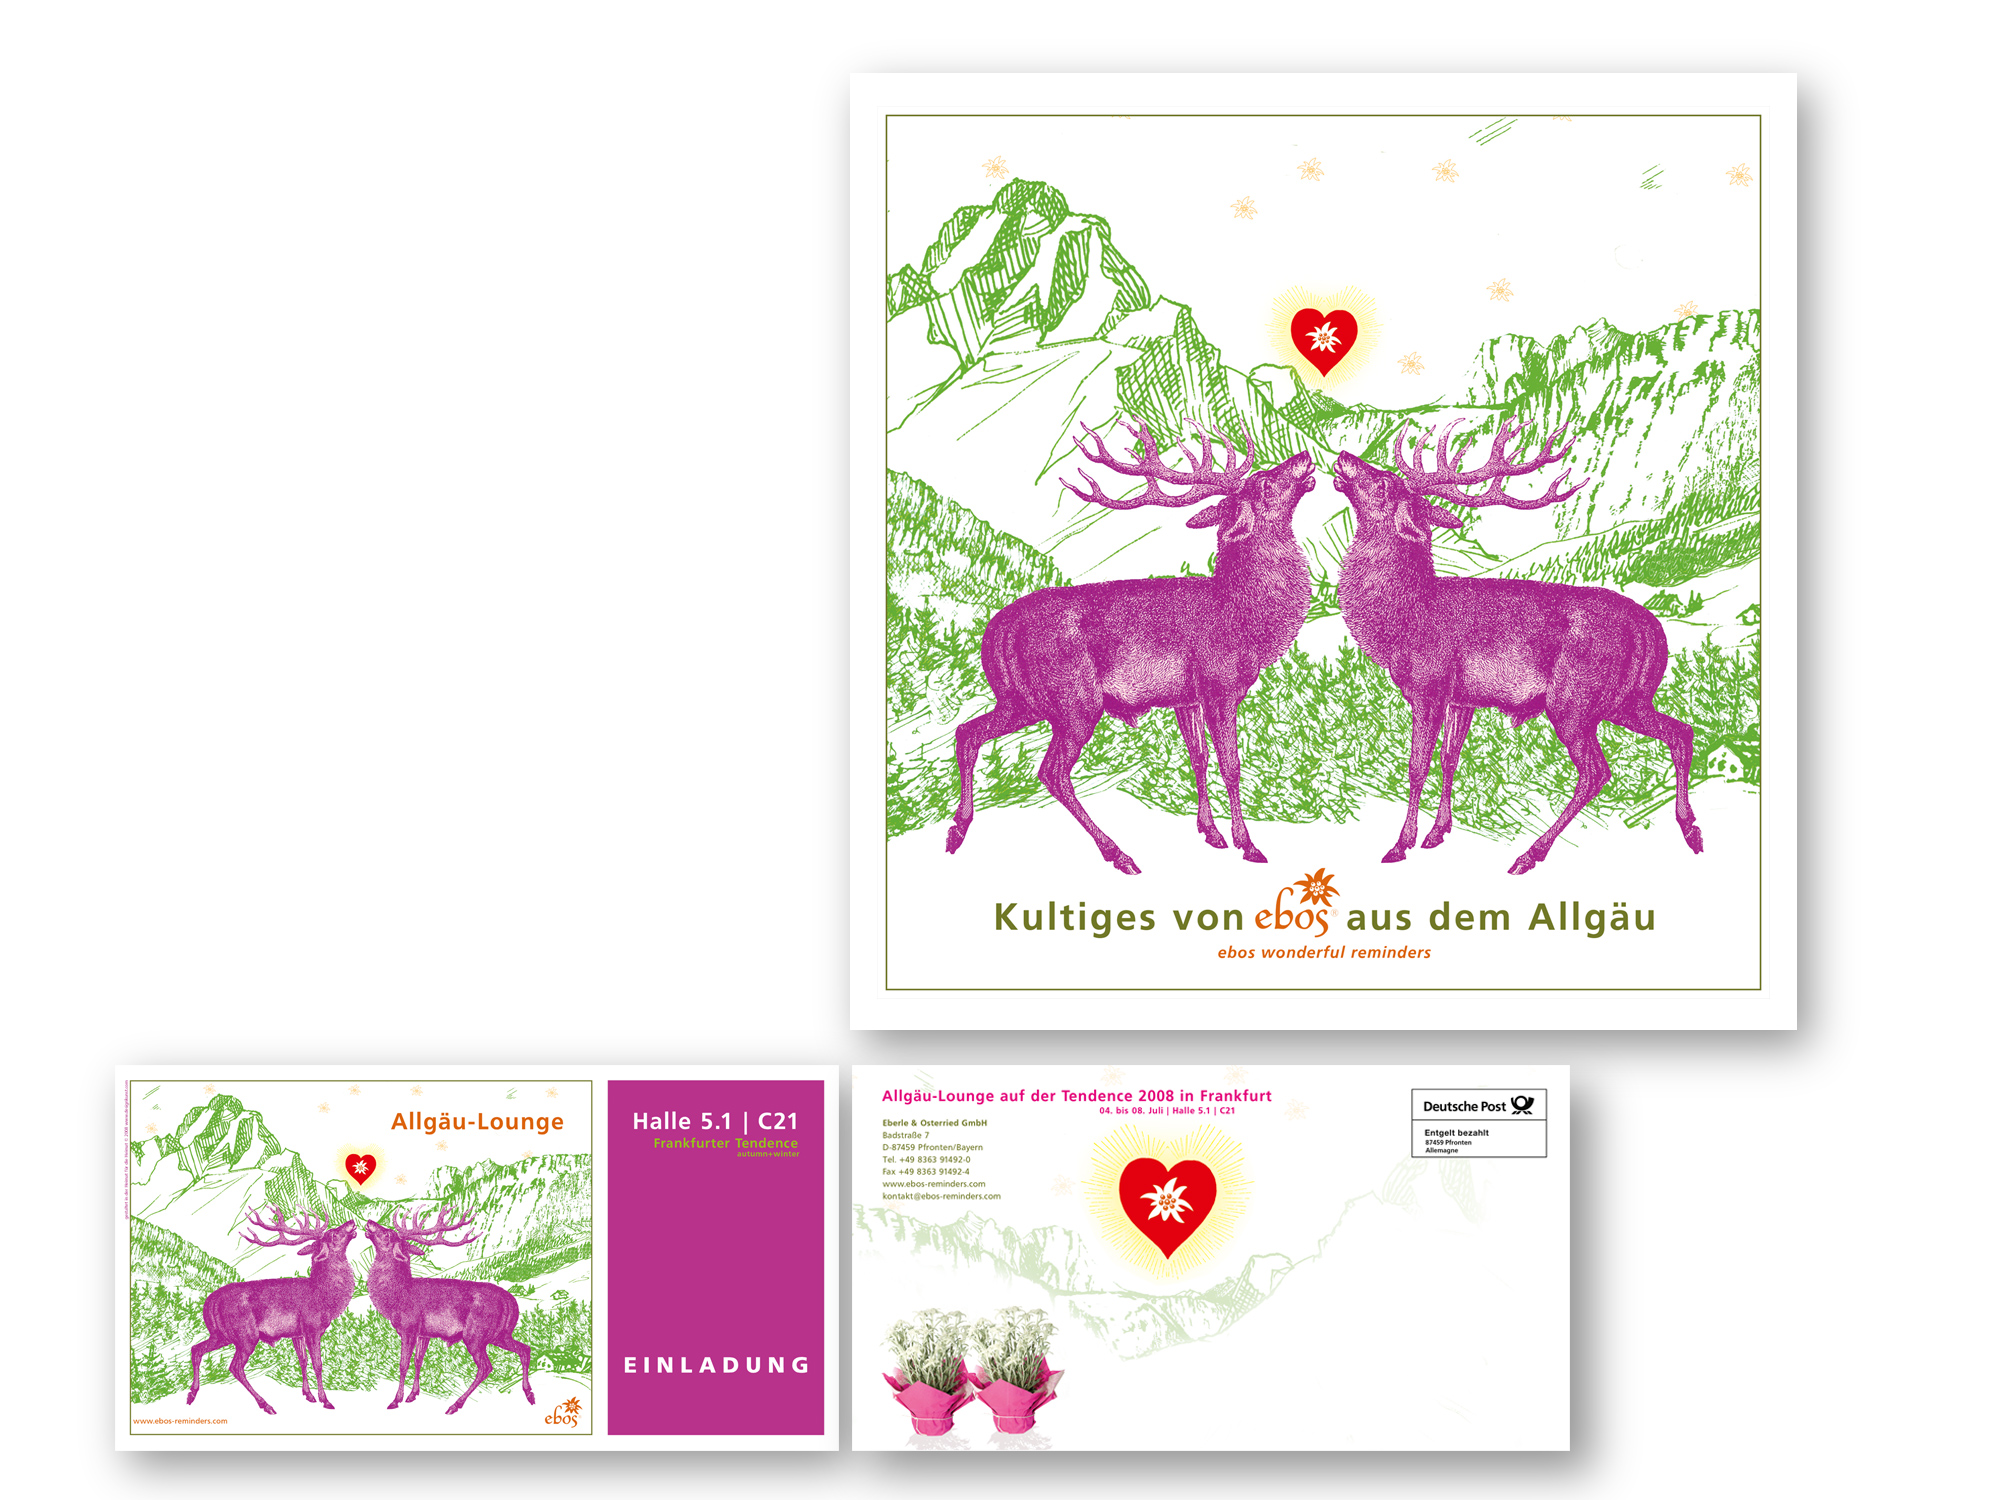 Corporate Design Katalog ebos designed by Sybs Bauer